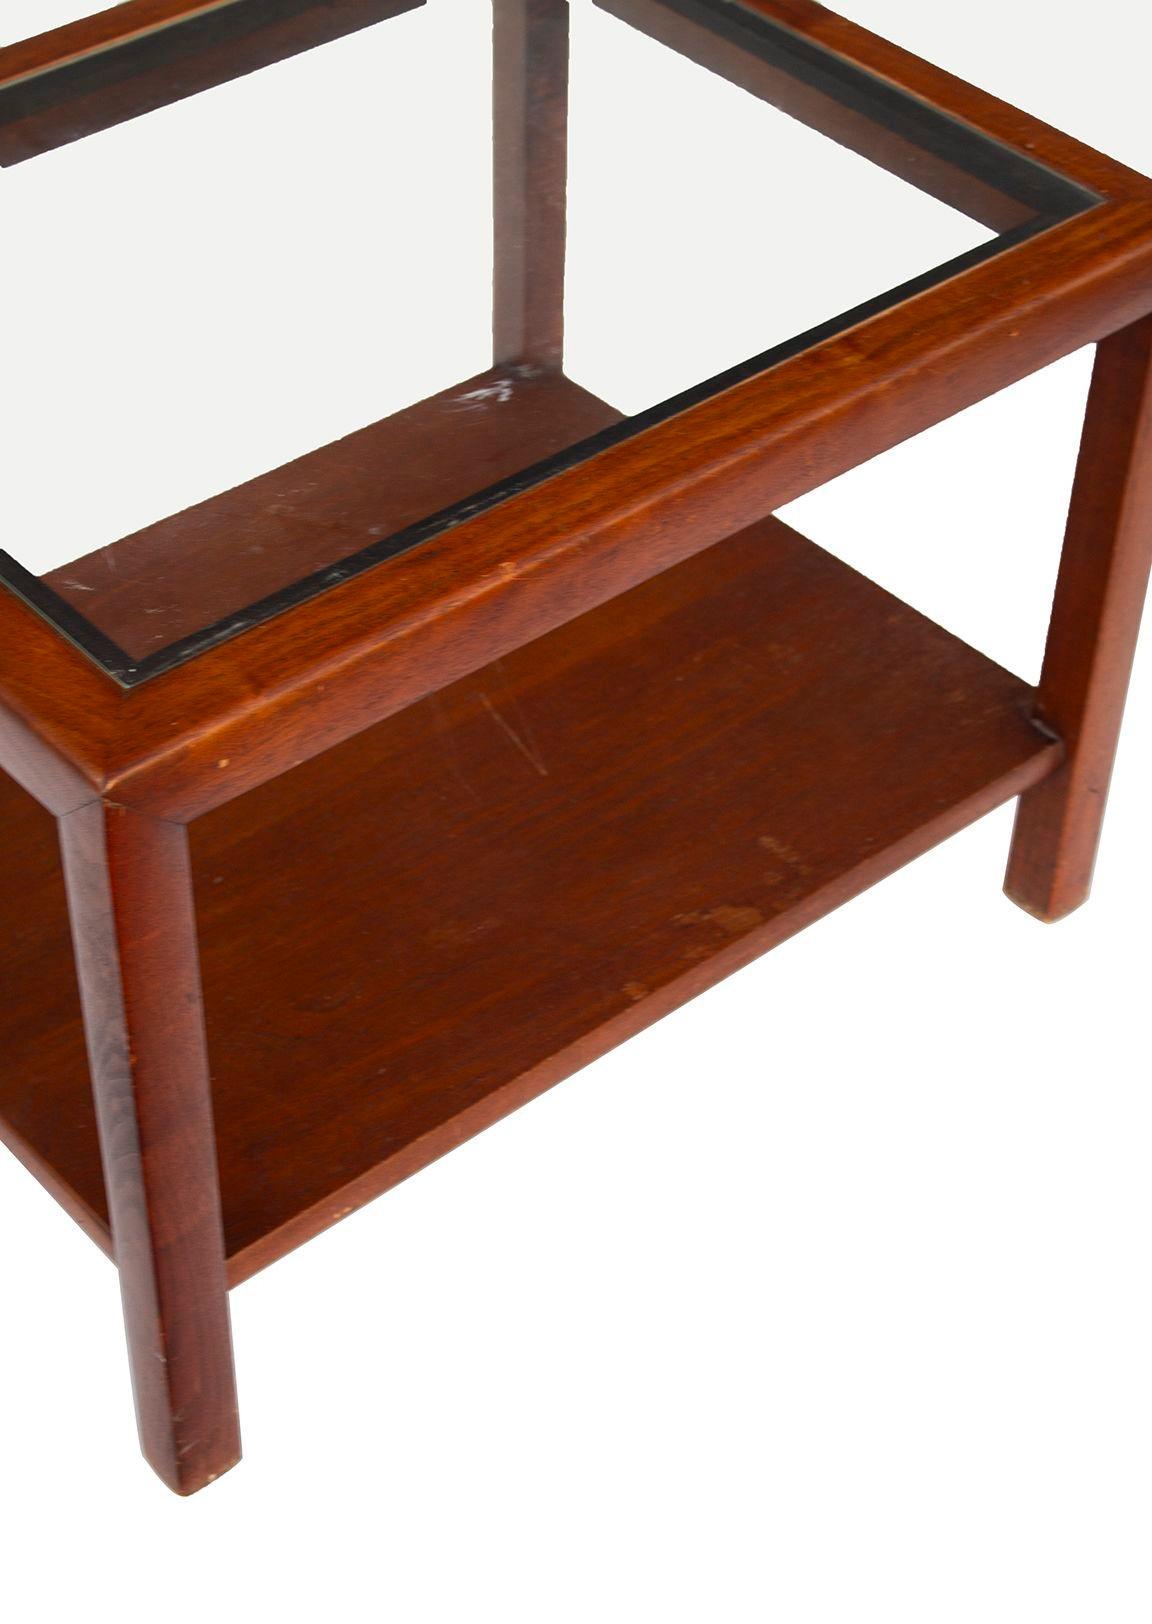 Late 20th Century Parsons End Table in Walnut with Glass Top, Henredon attr. For Sale